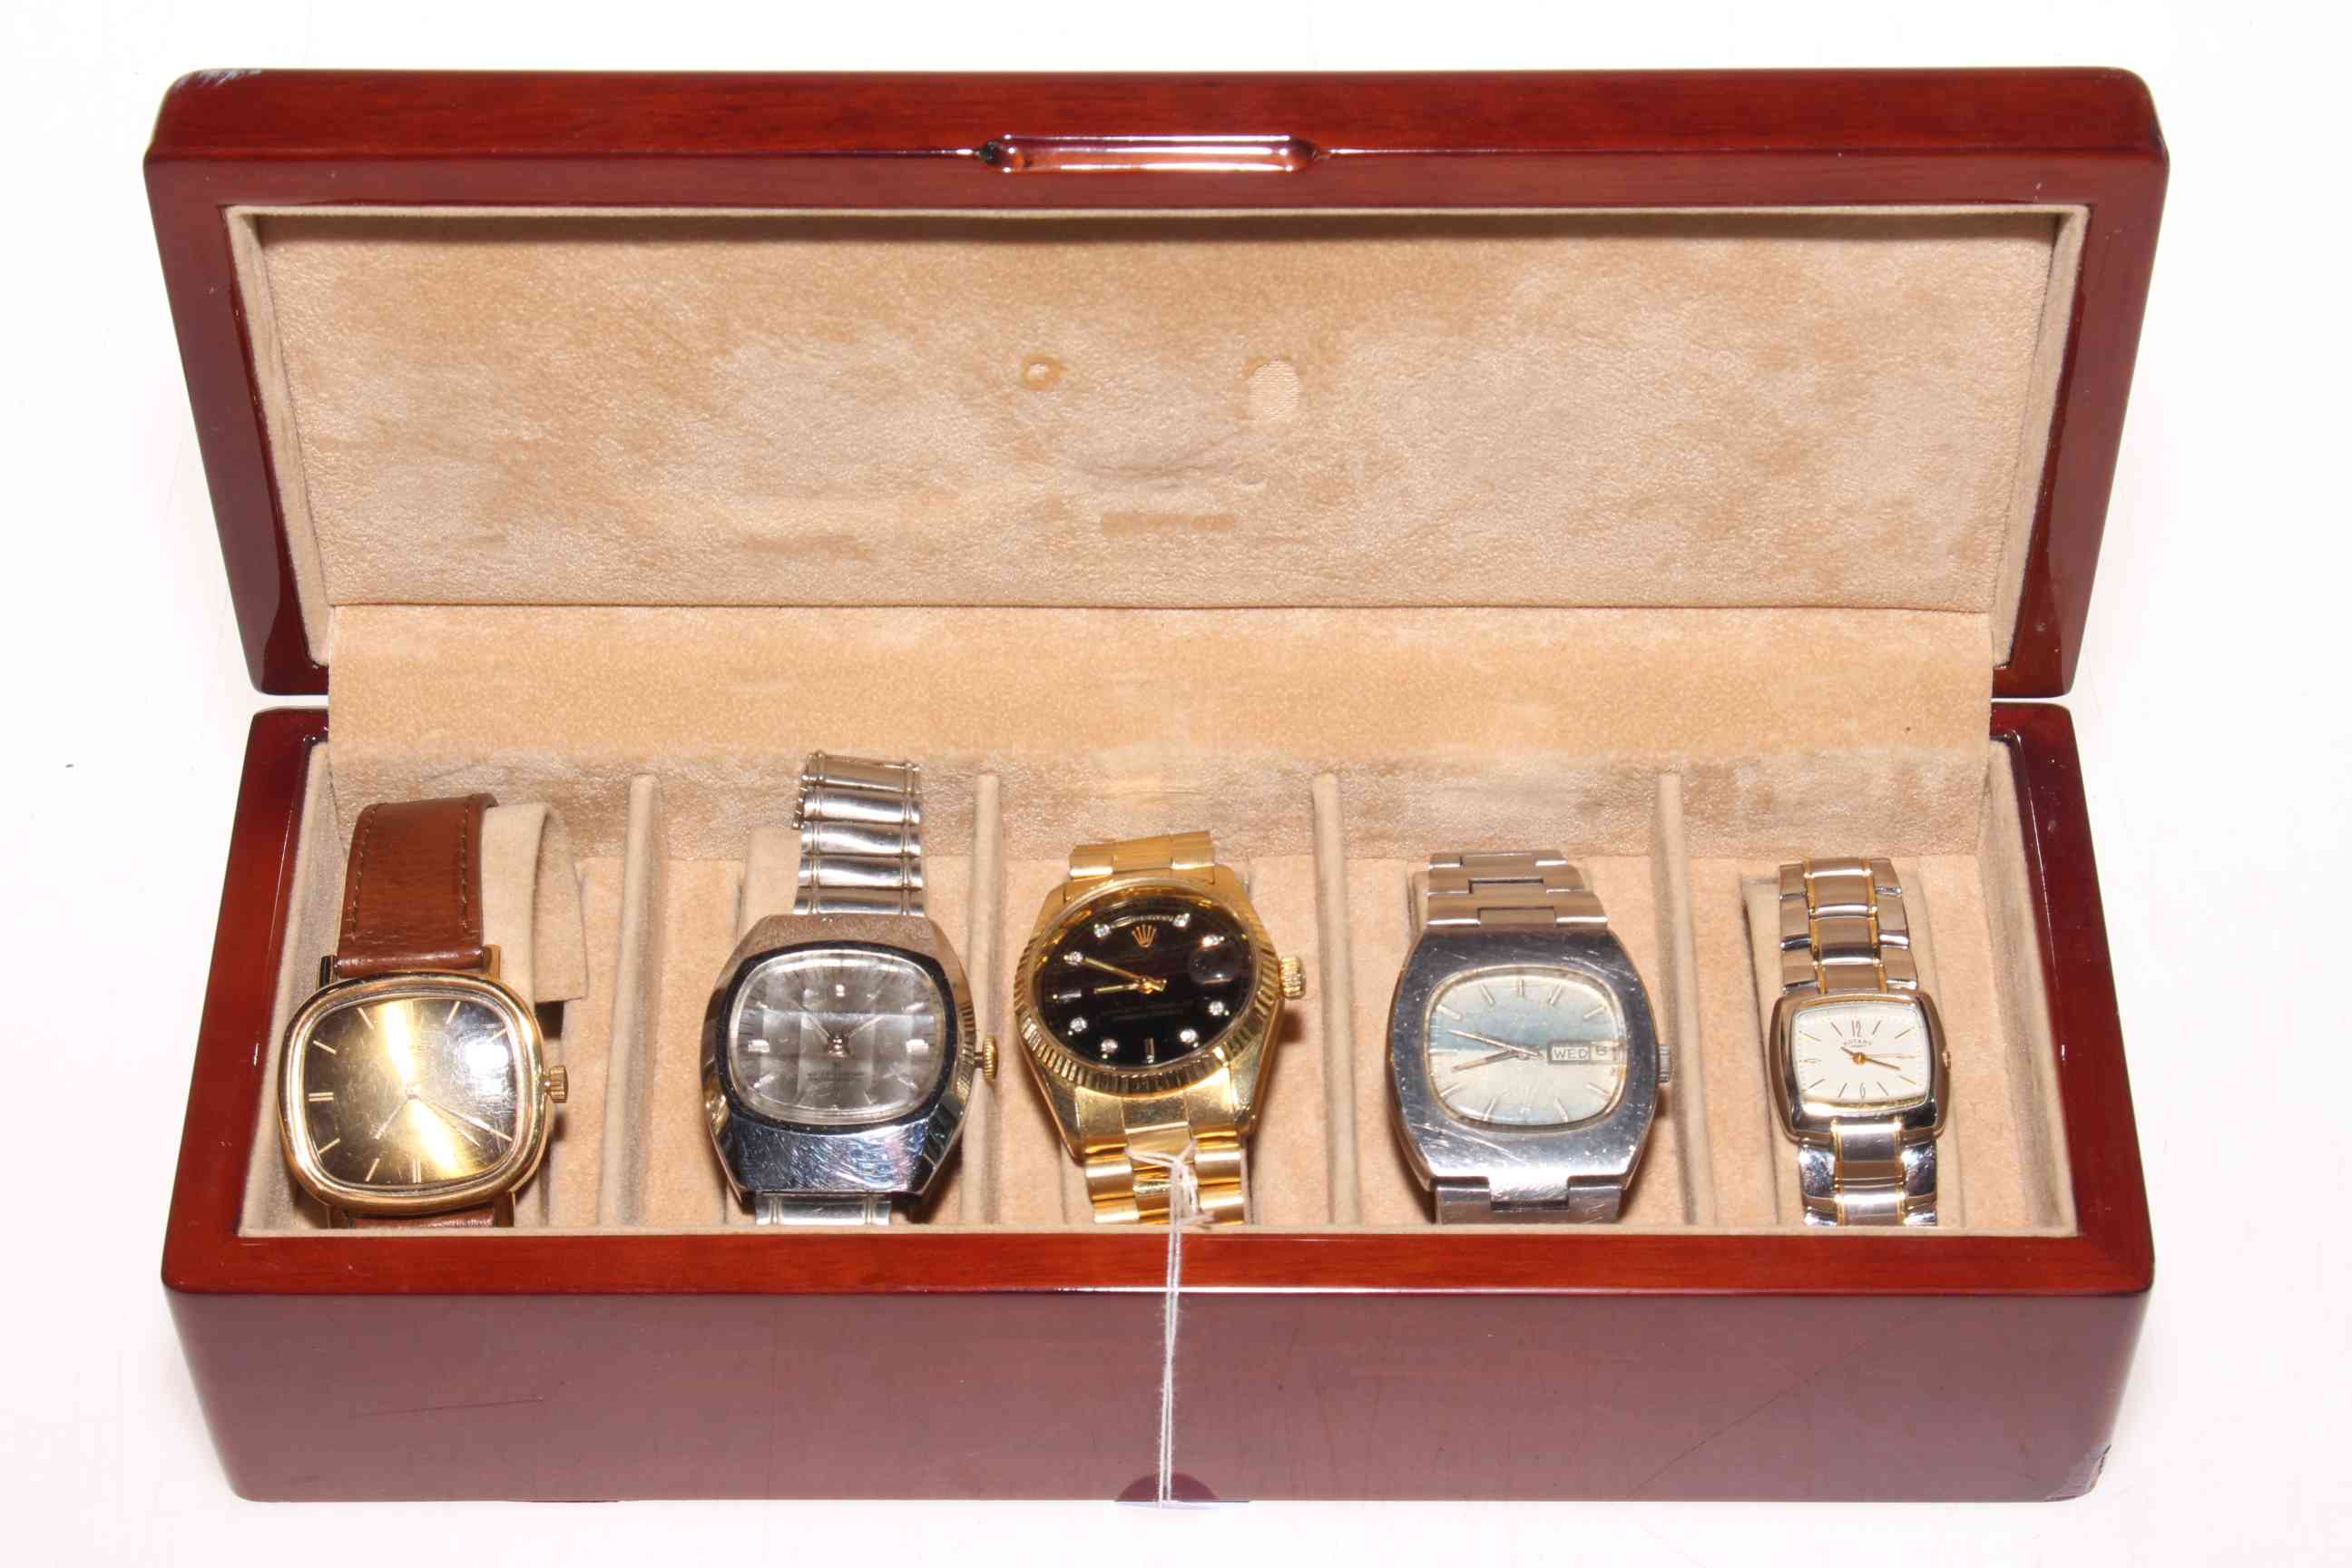 Box of five wristwatches.